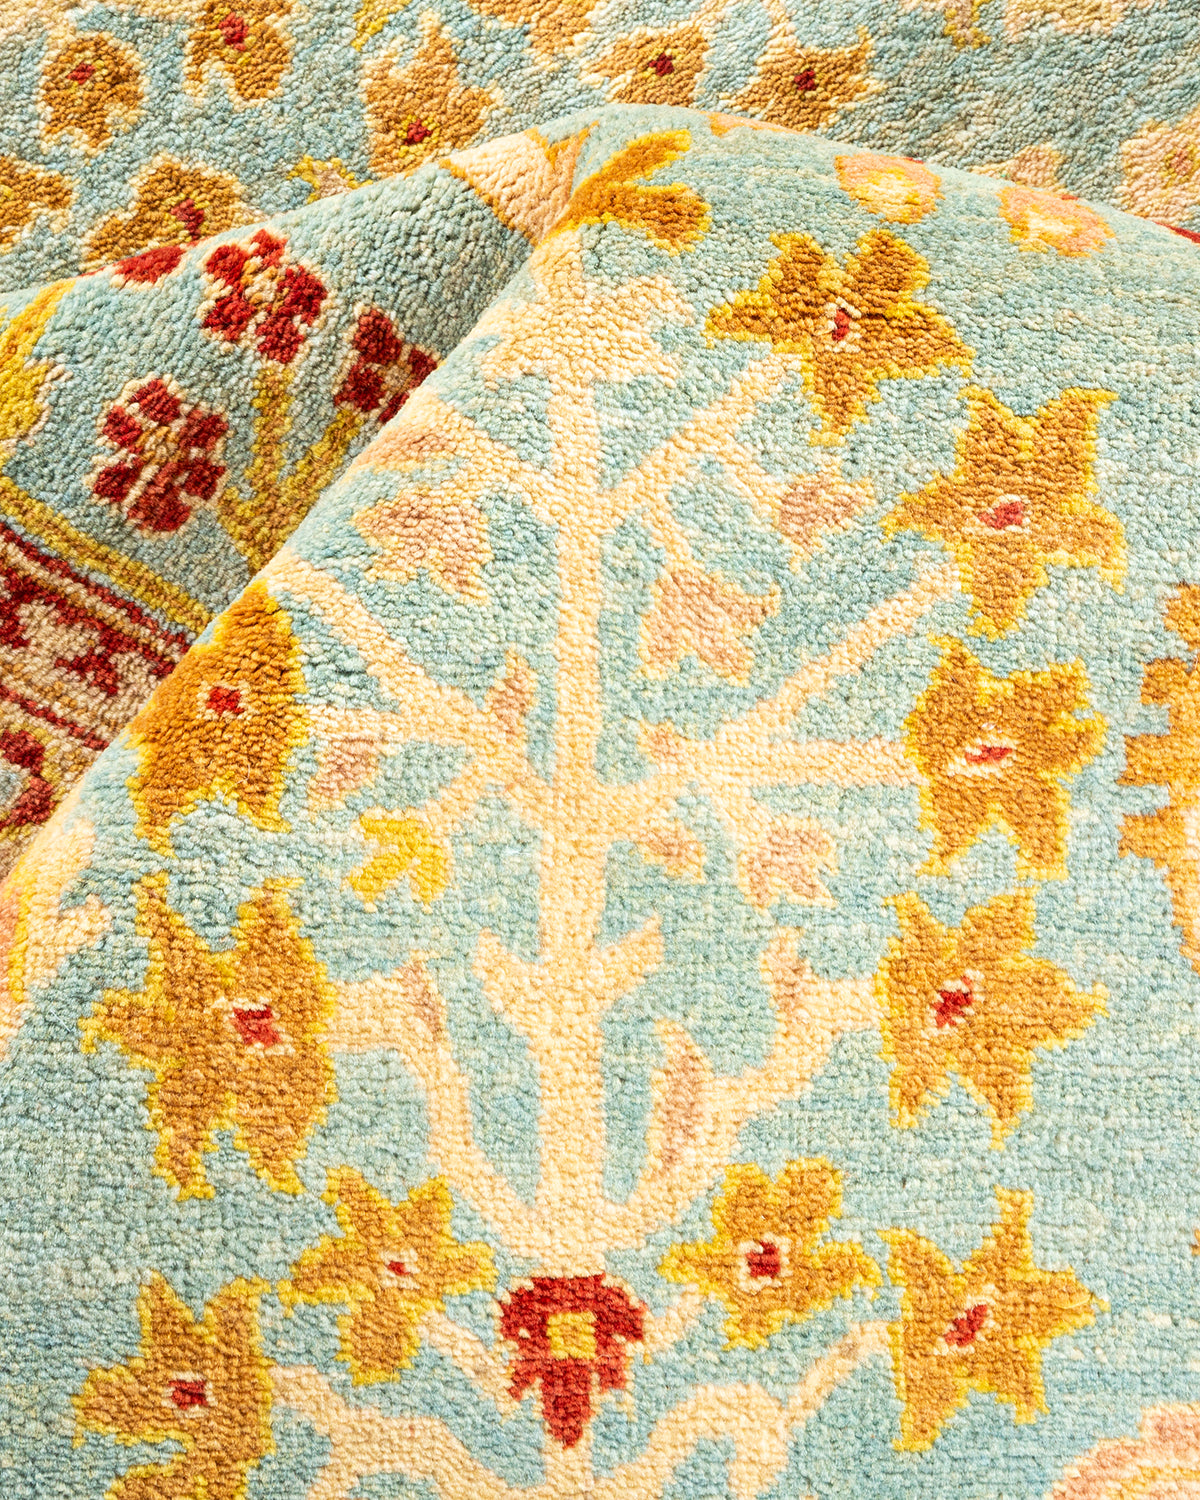 Eclectic, One-of-a-Kind Hand-Knotted Area Rug  - Light Blue,  8' 1" x 10' 1"